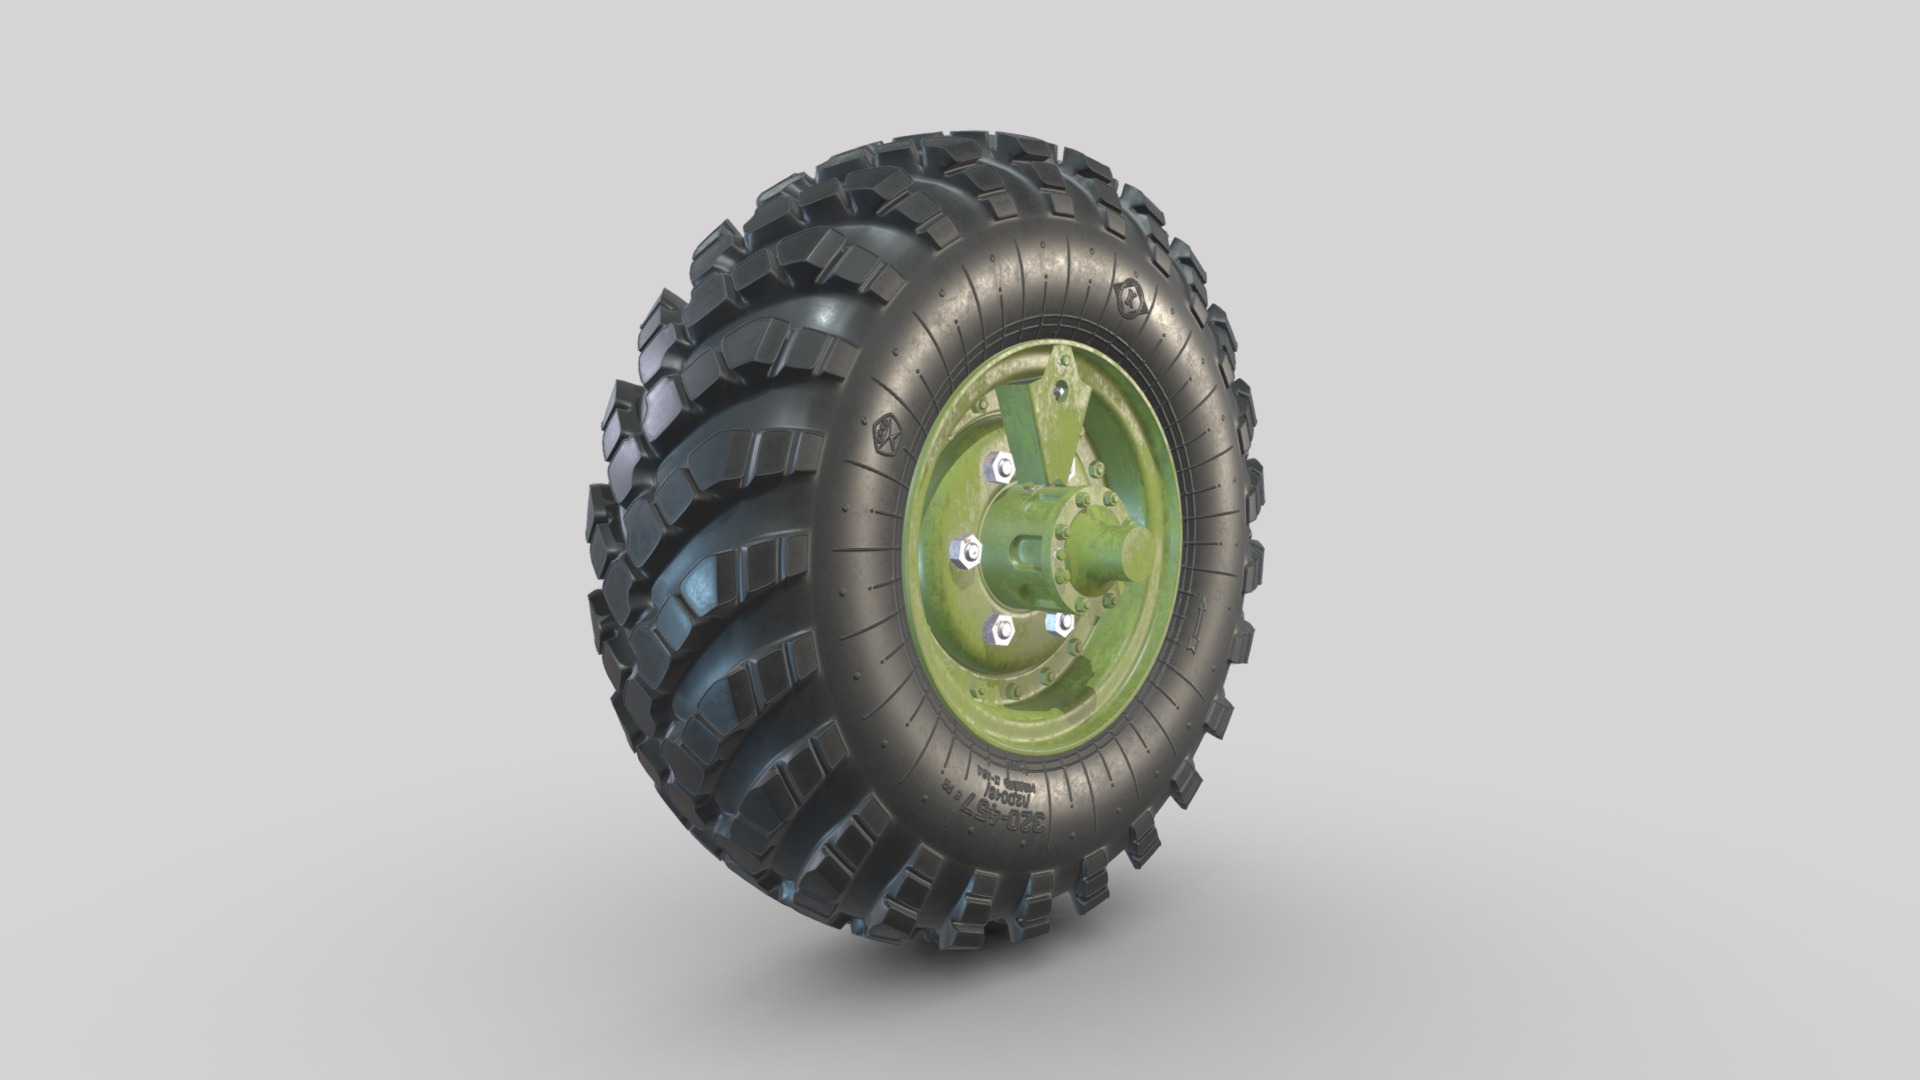 3D model ZIL- Wheel_v3_Almost new_Green - This is a 3D model of the ZIL- Wheel_v3_Almost new_Green. The 3D model is about a black and silver watch.